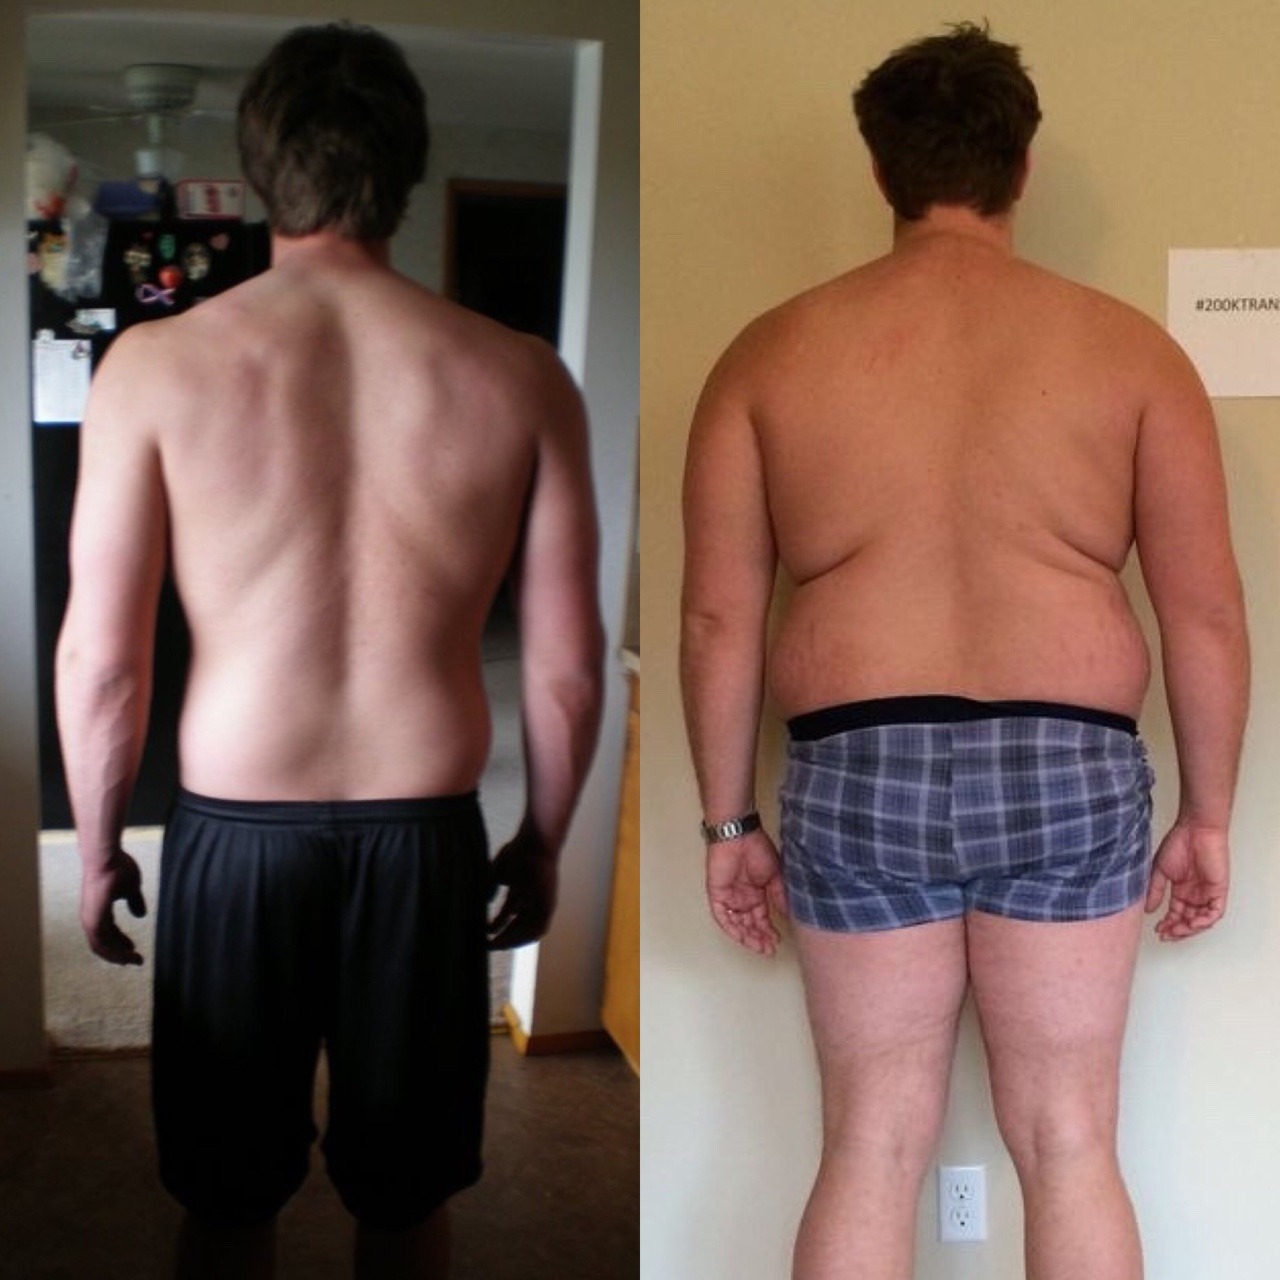 This dude went from a lean 220lbs to a whopping 328lbs only a few years aft...